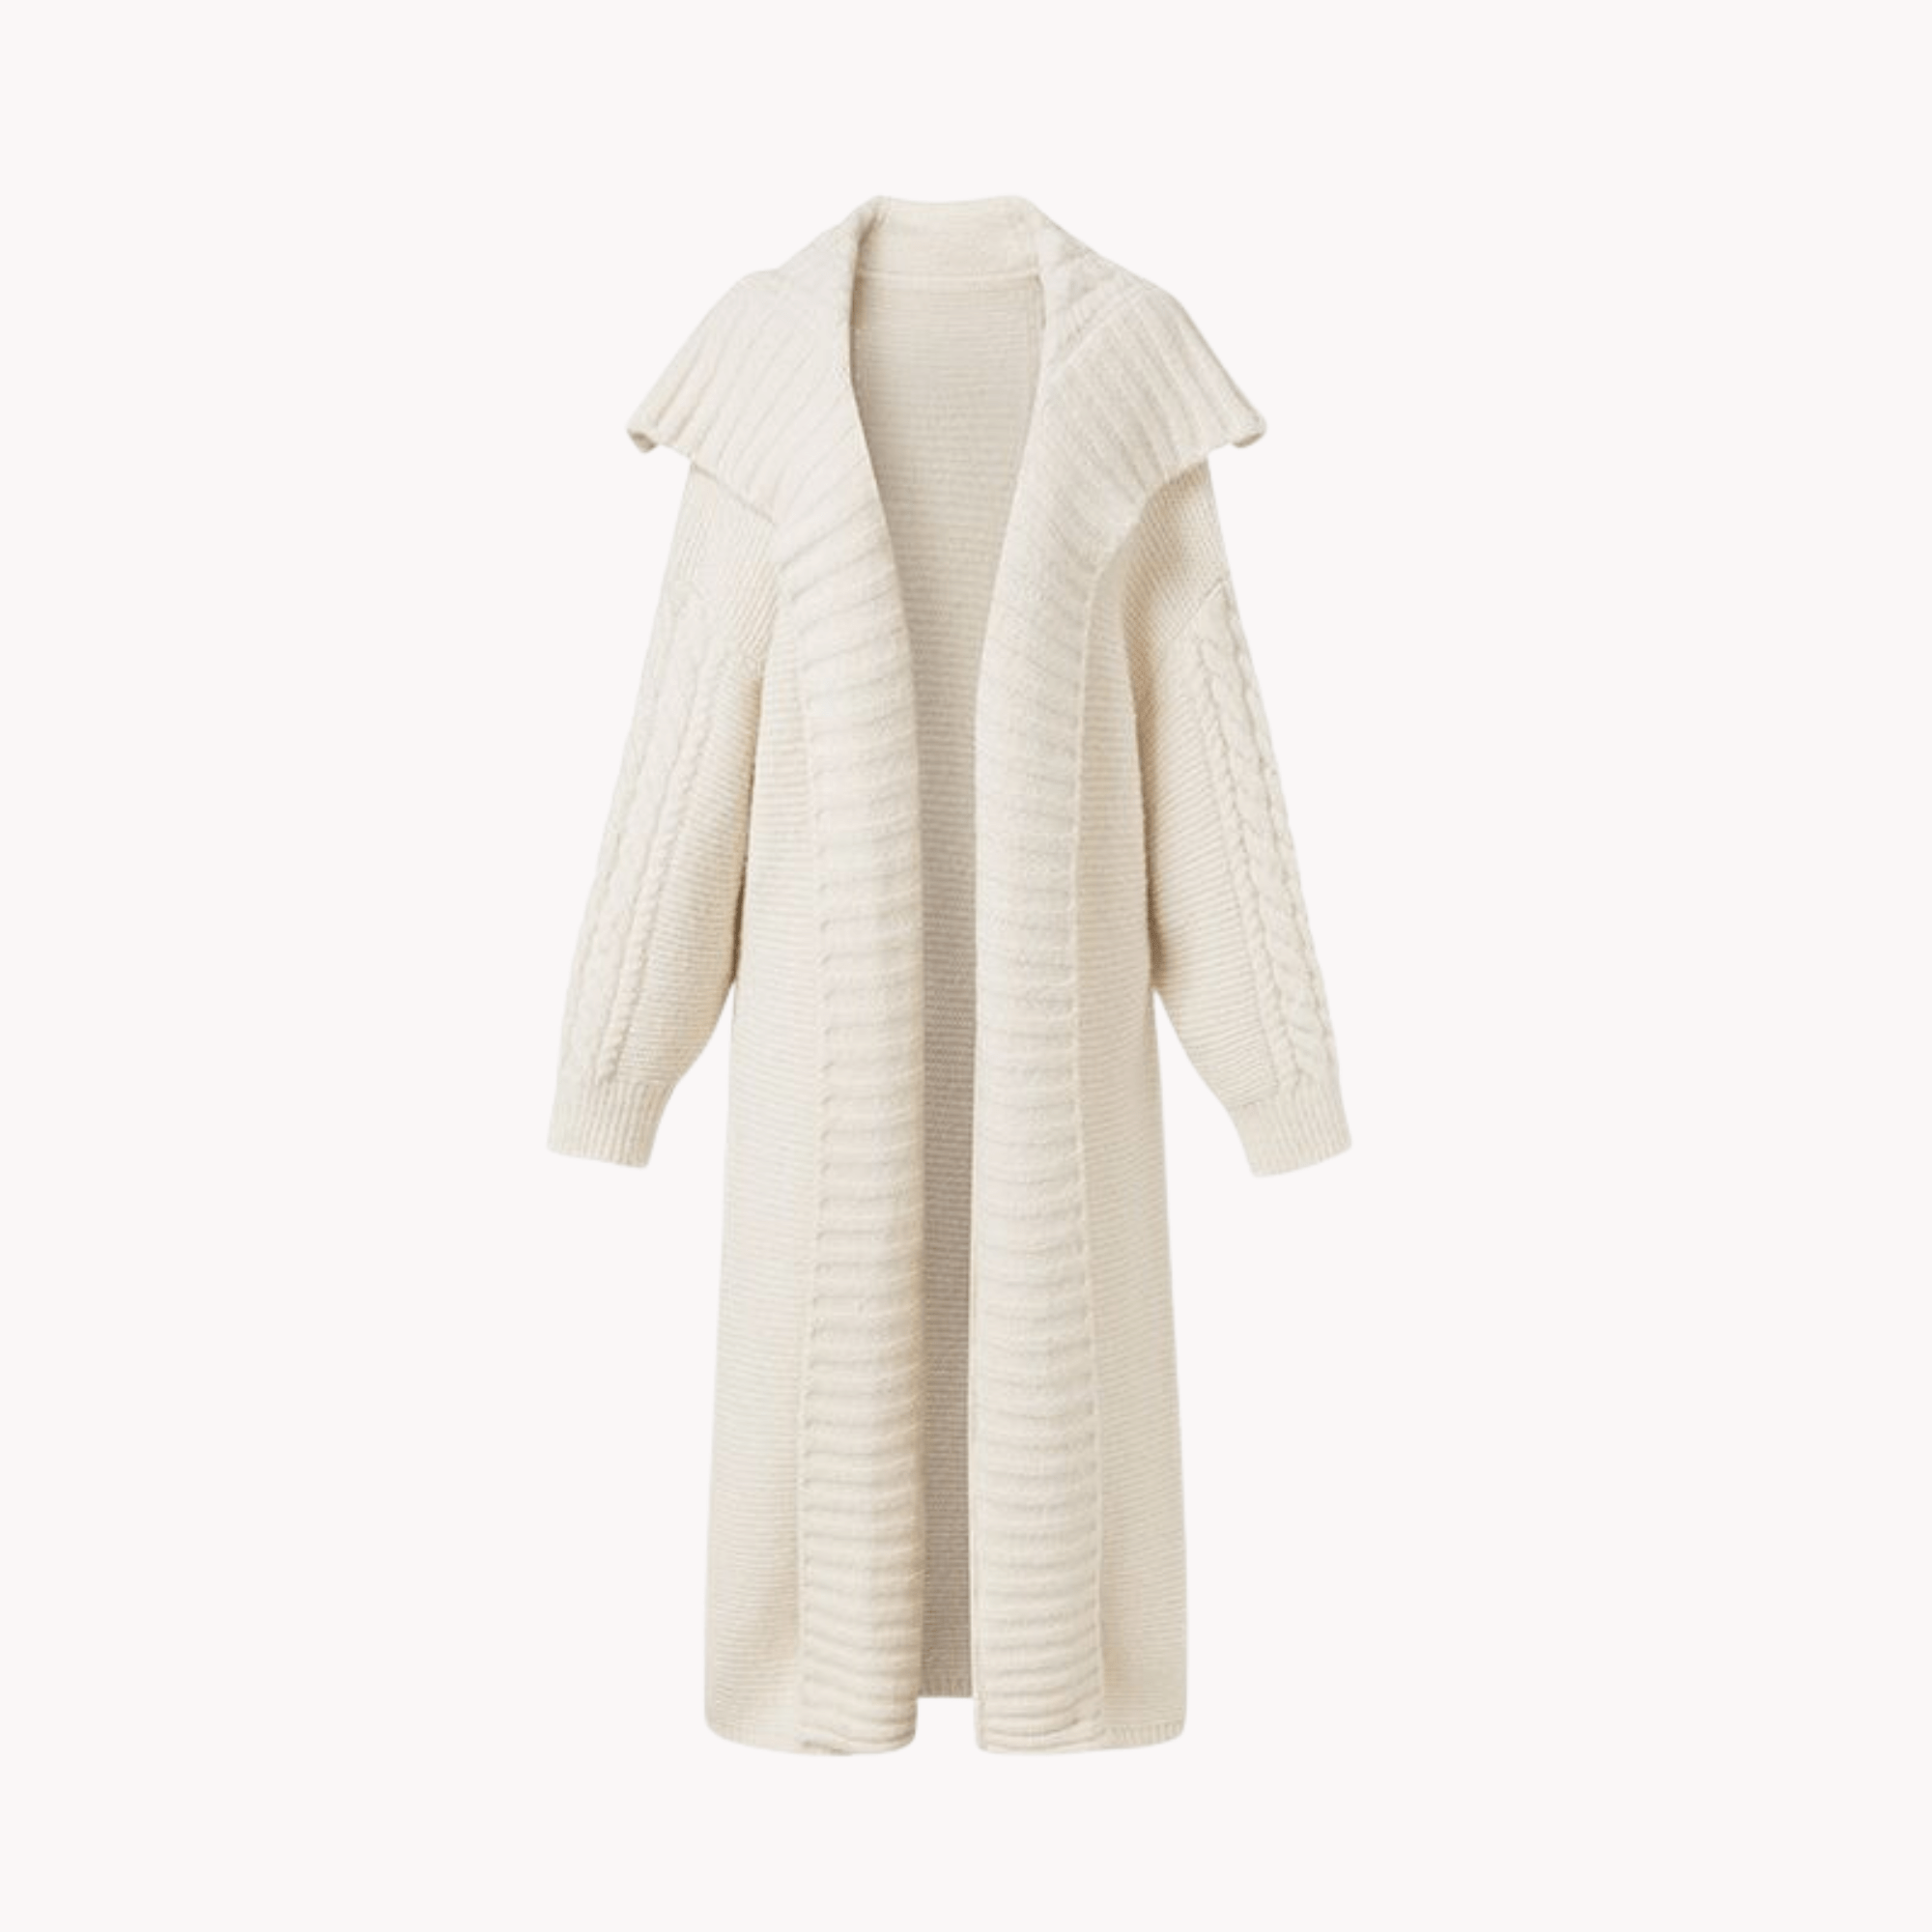 Buttonless Loose Fit Knit Cardigan - Kelly Obi New York